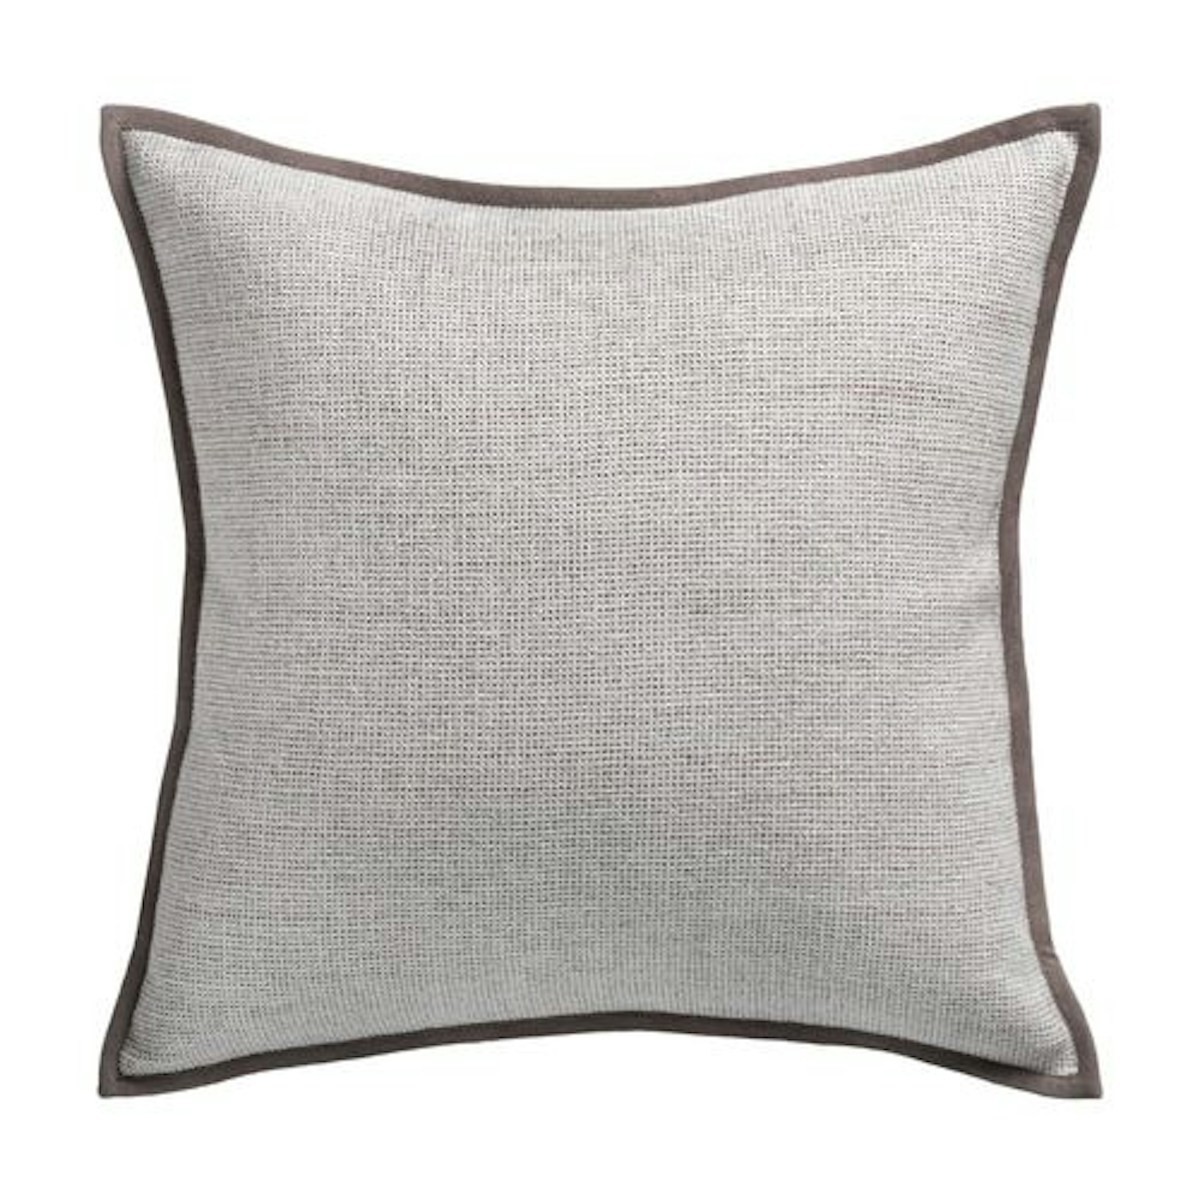 Valley Cloud Forest Cushion - 9 Best Luxury Cushions to Buy for your Home - Style Guide - LuxDeco.com